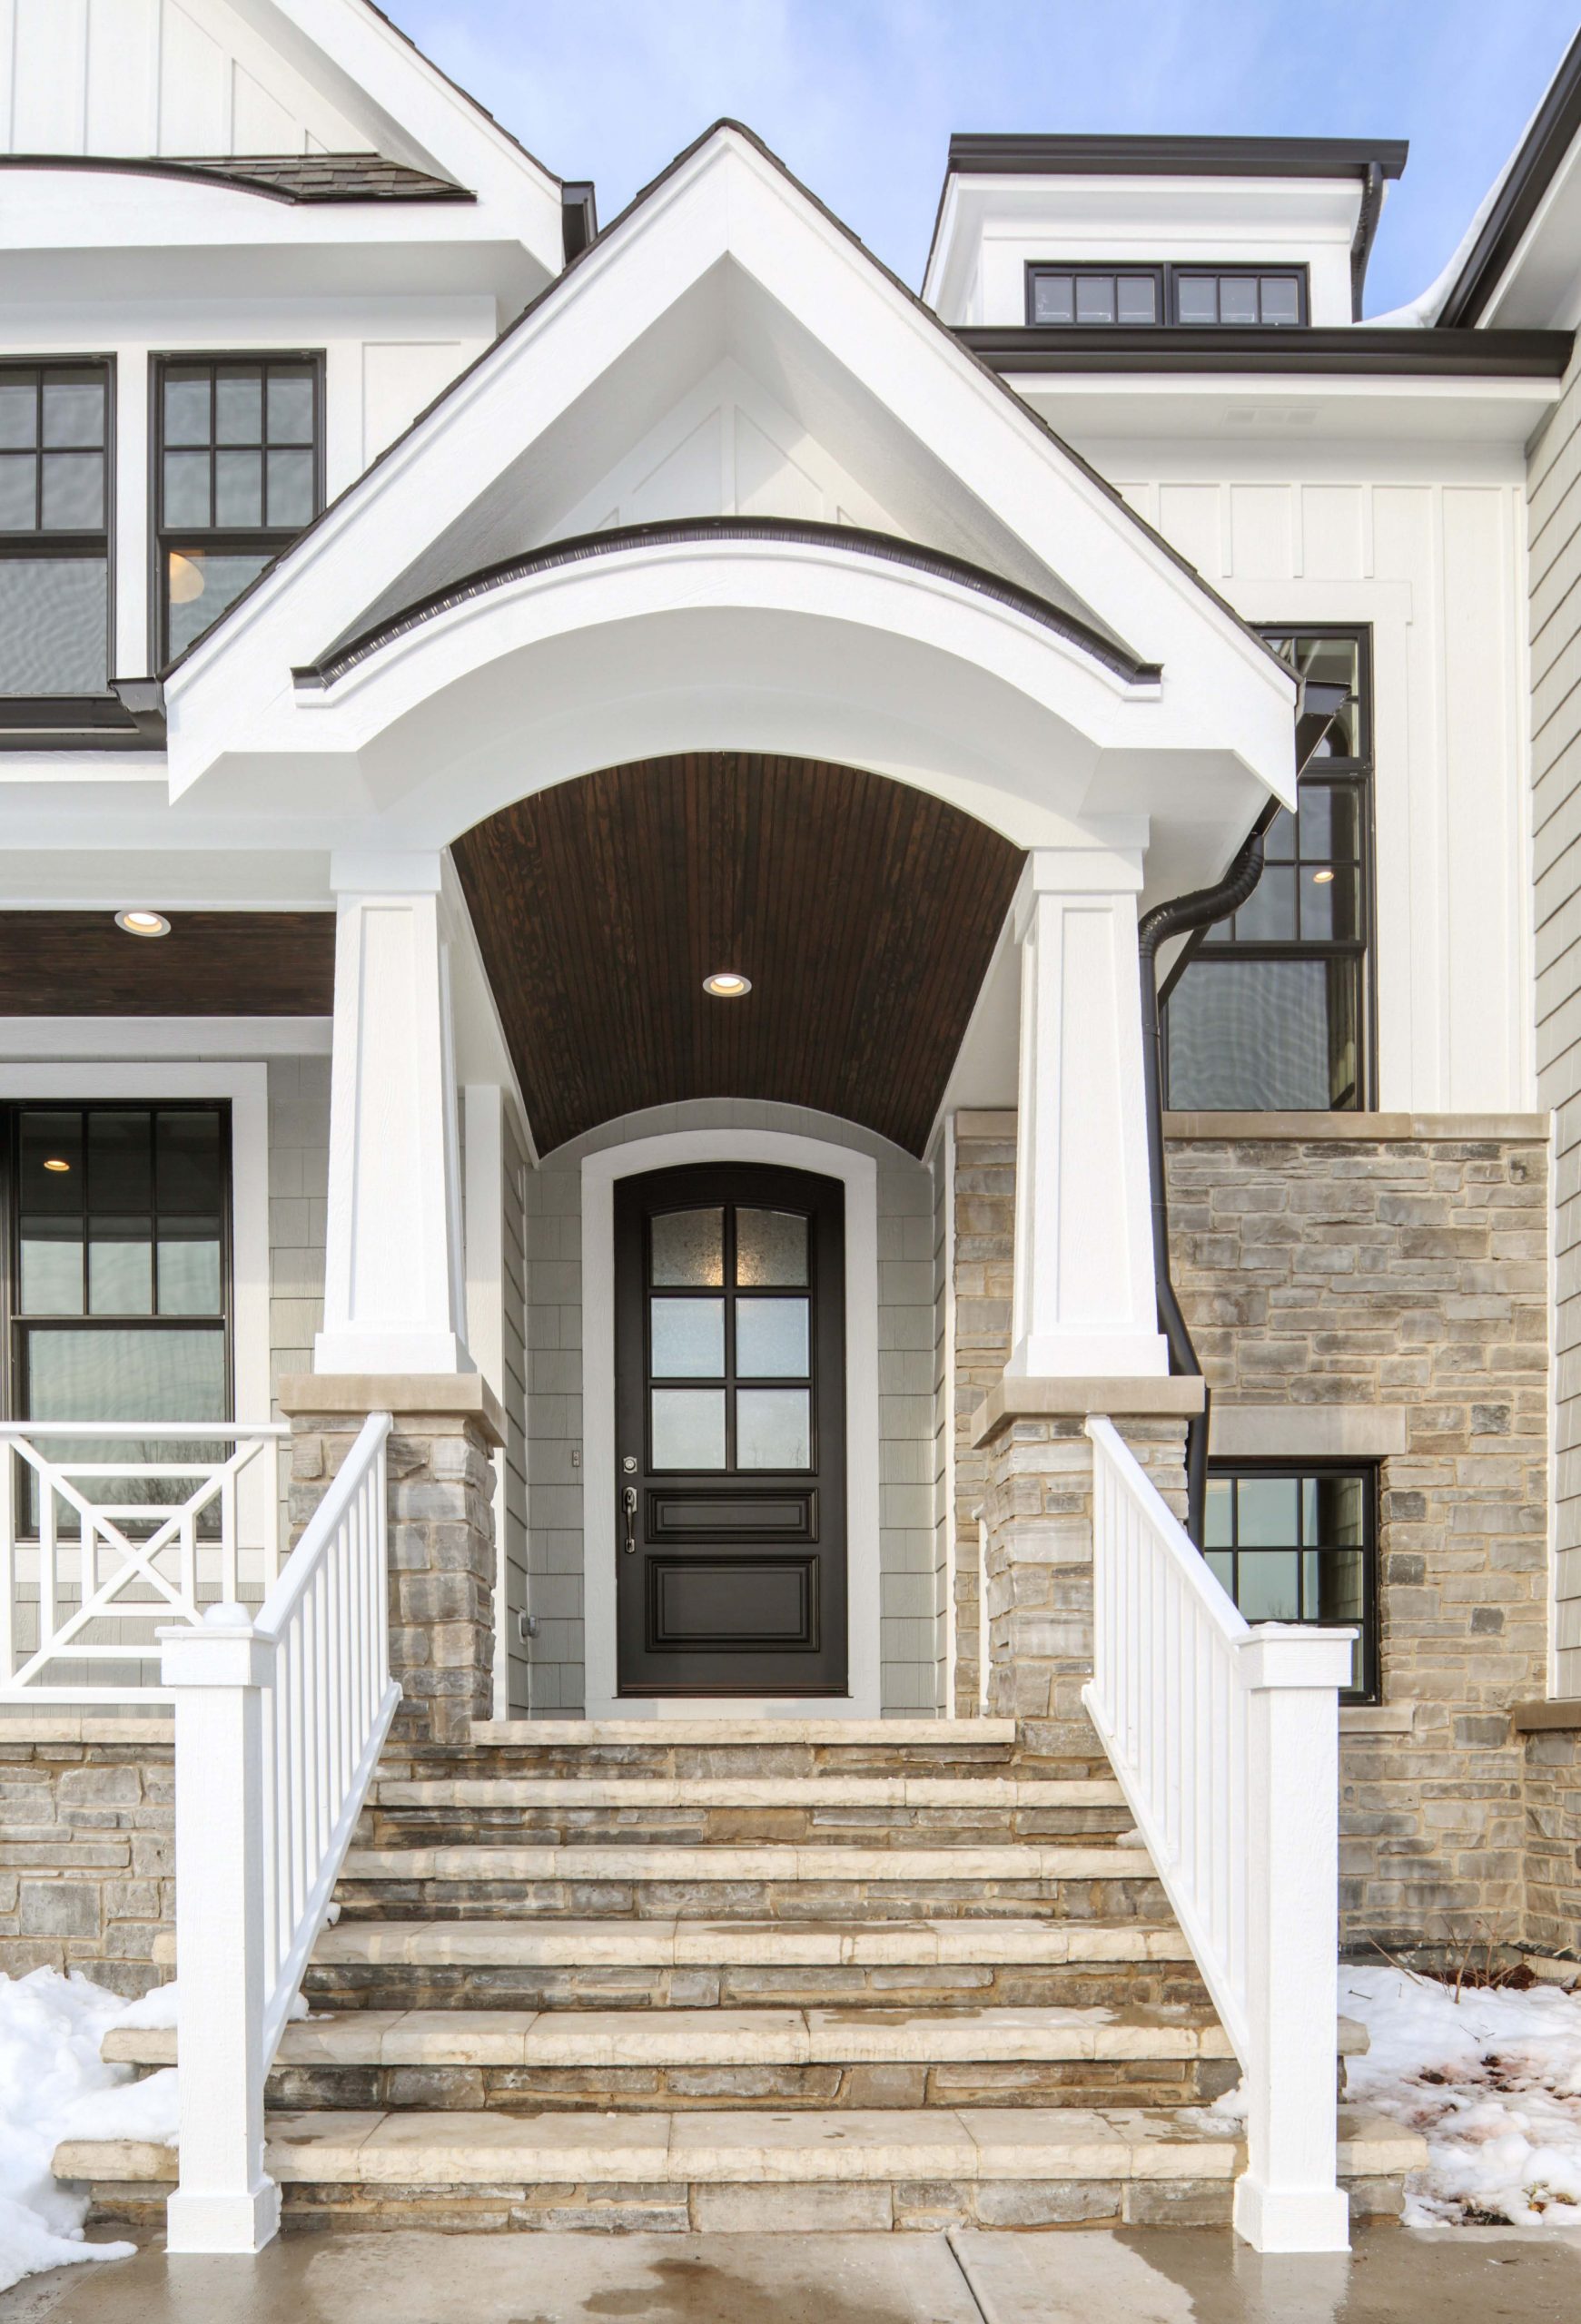 Light gray siding color with tons of white trim and white wall paneling. Dark brown wood porch soffit with recessed lighting. Tapered porch columns with white rails. Stone veneer. Black gutters. Black framed windows.